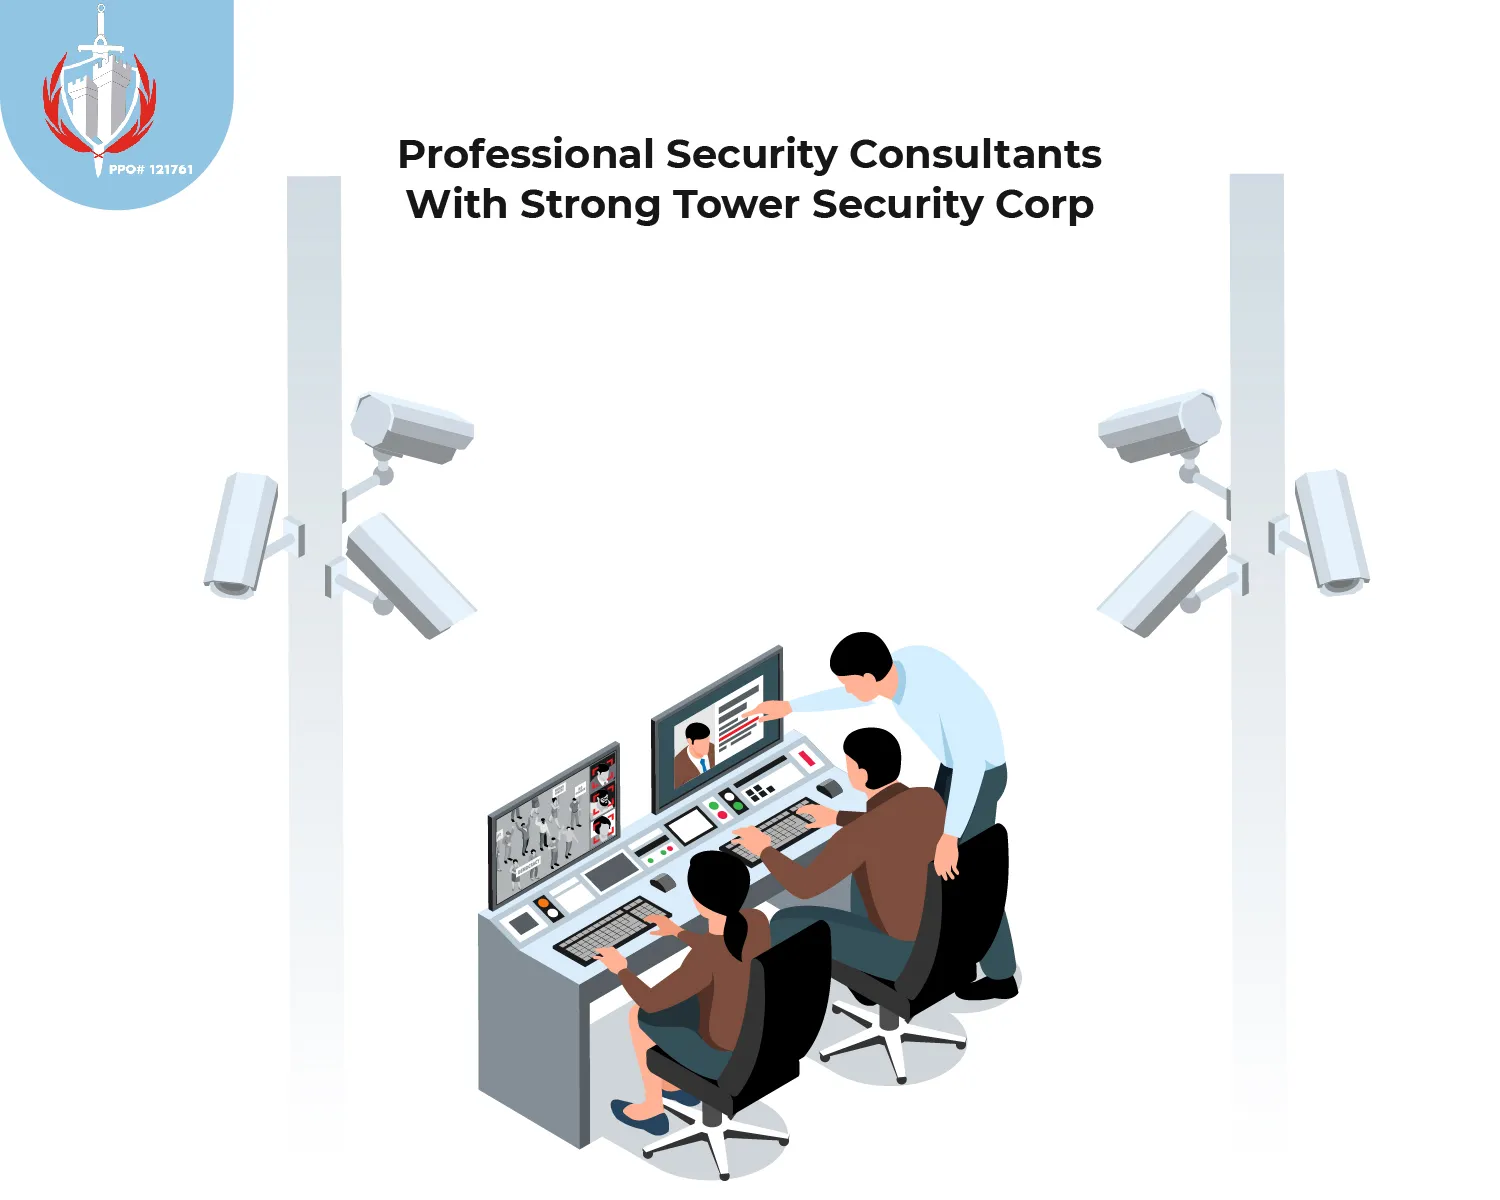 Professional Security Consultants With Strong Tower Security Corp